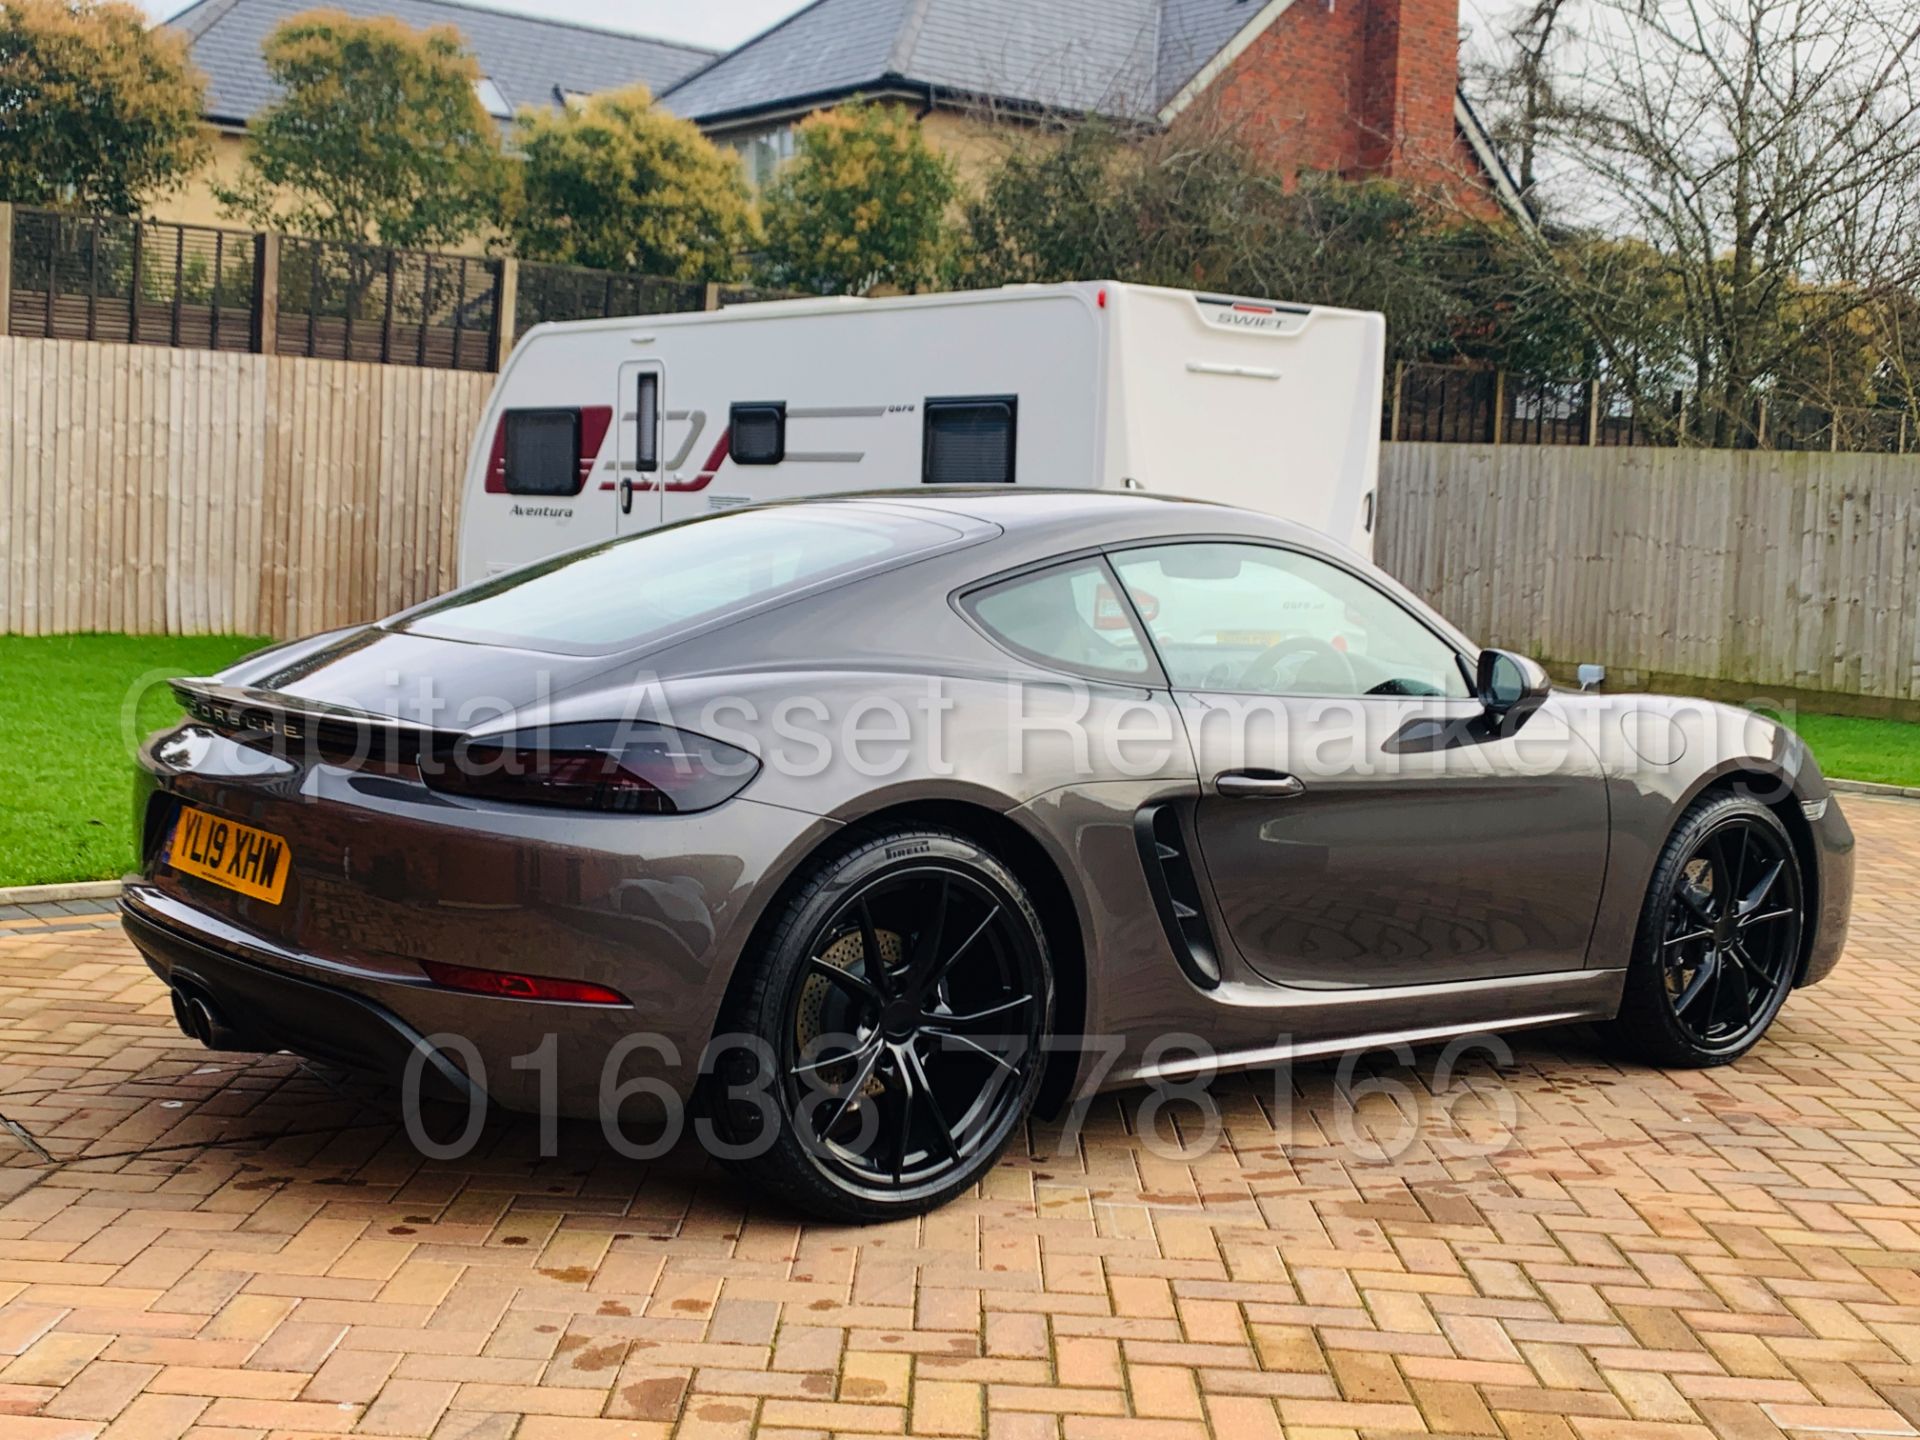 (On Sale) PORSCHE 718 CAYMAN S-A (2019 - ALL NEW MODEL) 'PDK AUTO' *MASSIVE SPEC* (1 OWNER FROM NEW) - Image 8 of 48